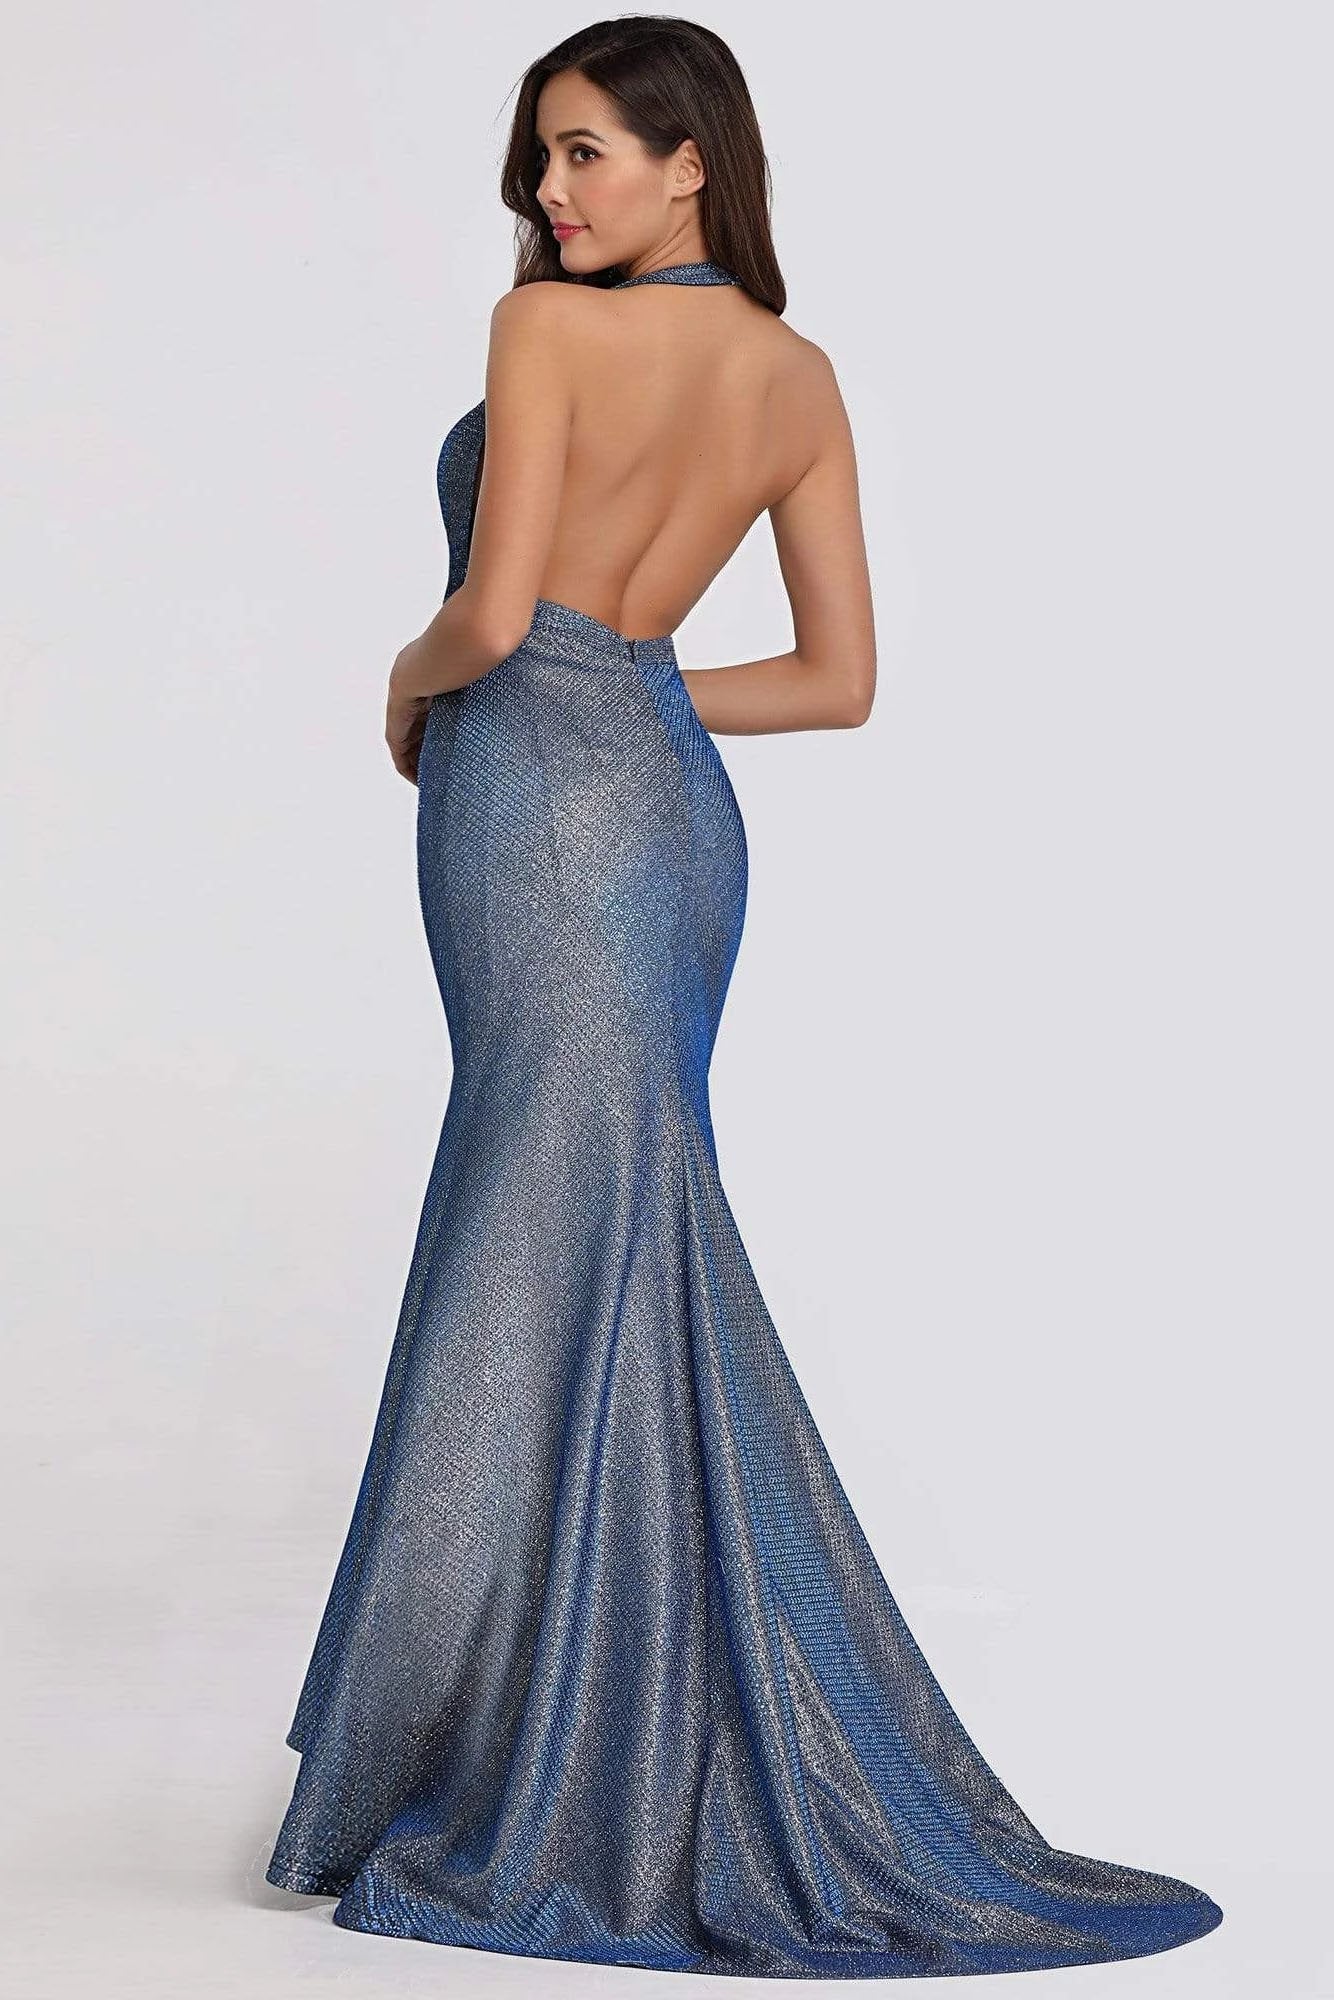 Sexy V Neck Halter Blue Backless Prom Dresses, Cheap Long Party Dresses STC15365